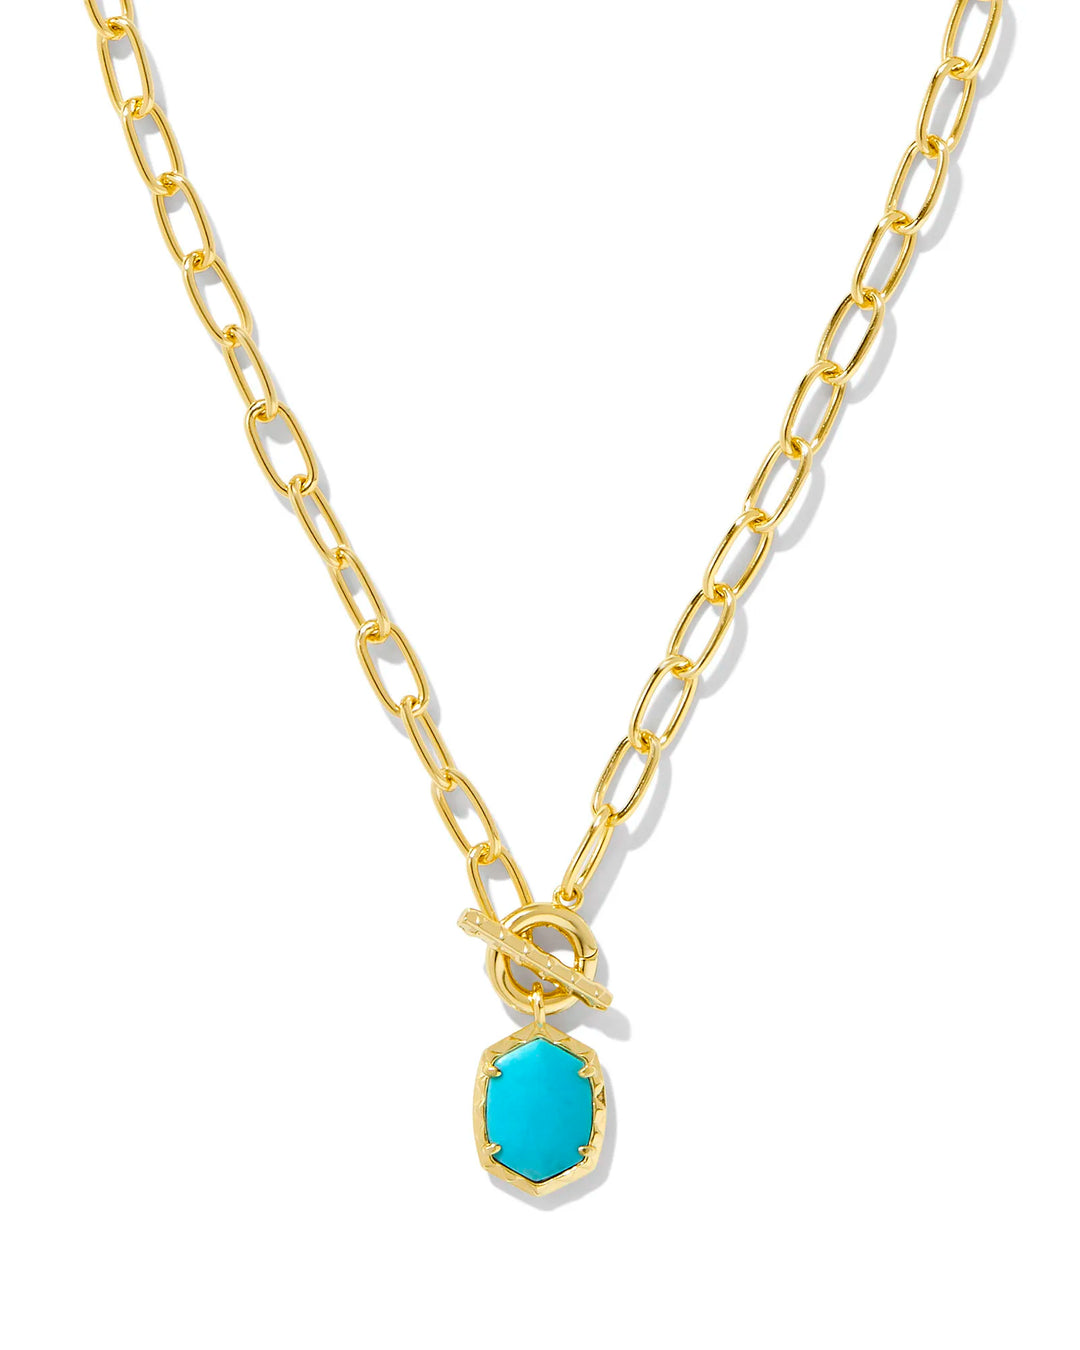 Kendra Scott Daphne Convertible Gold Link and Chain Necklace in Variegated Turquoise Magnesite